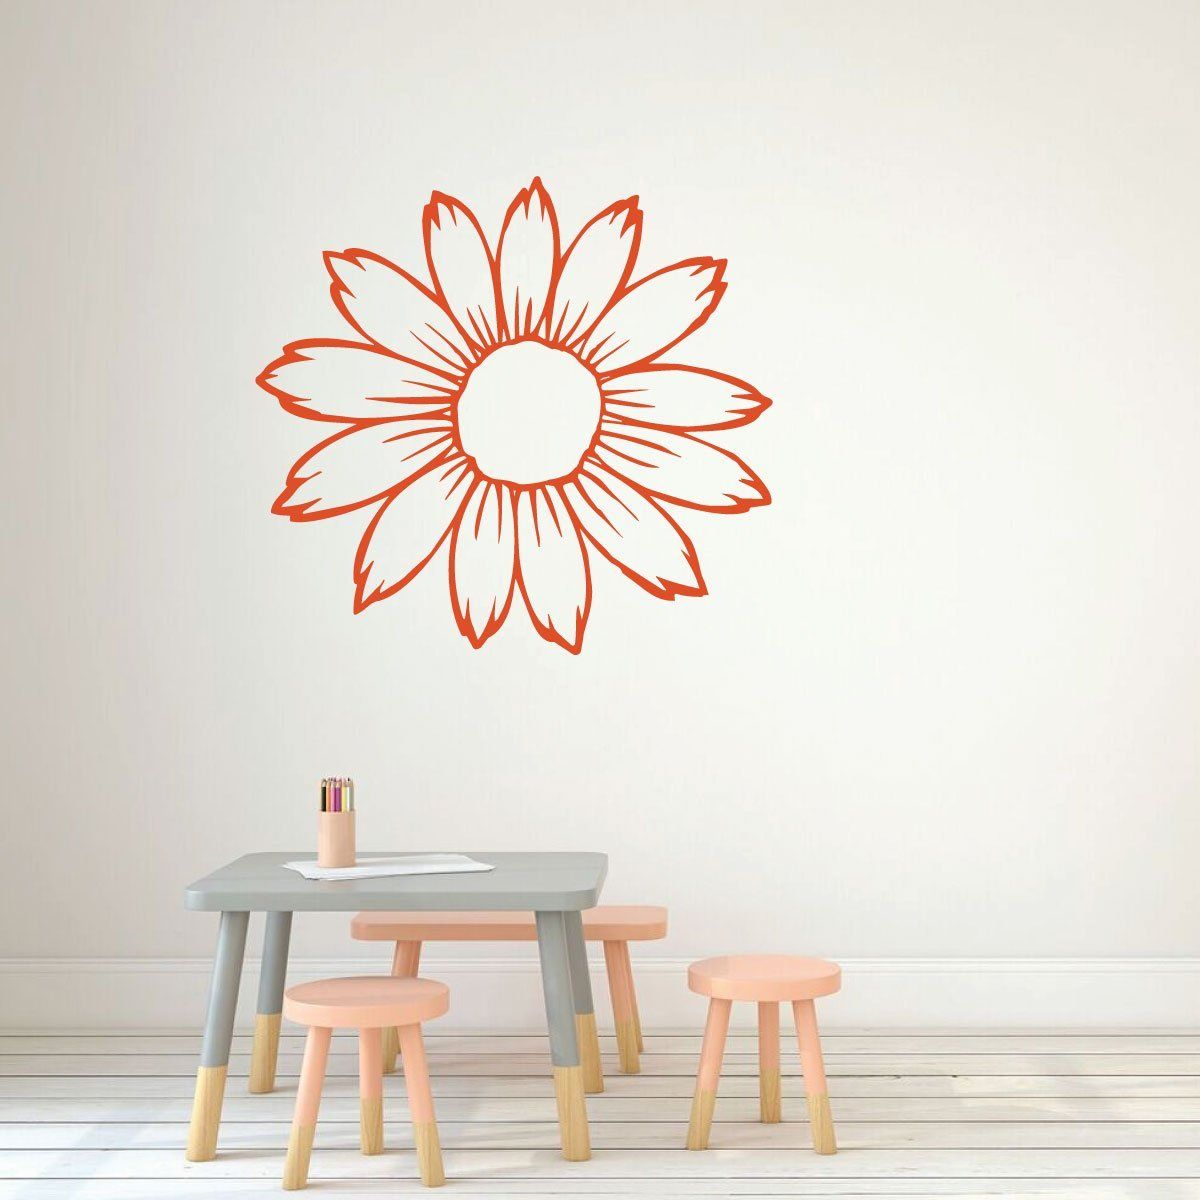 Sunflower Wall Decal Silhouette Vinyl Decor Wall Decal Regarding Most Up To Date Stripes Wall Art (View 20 of 20)